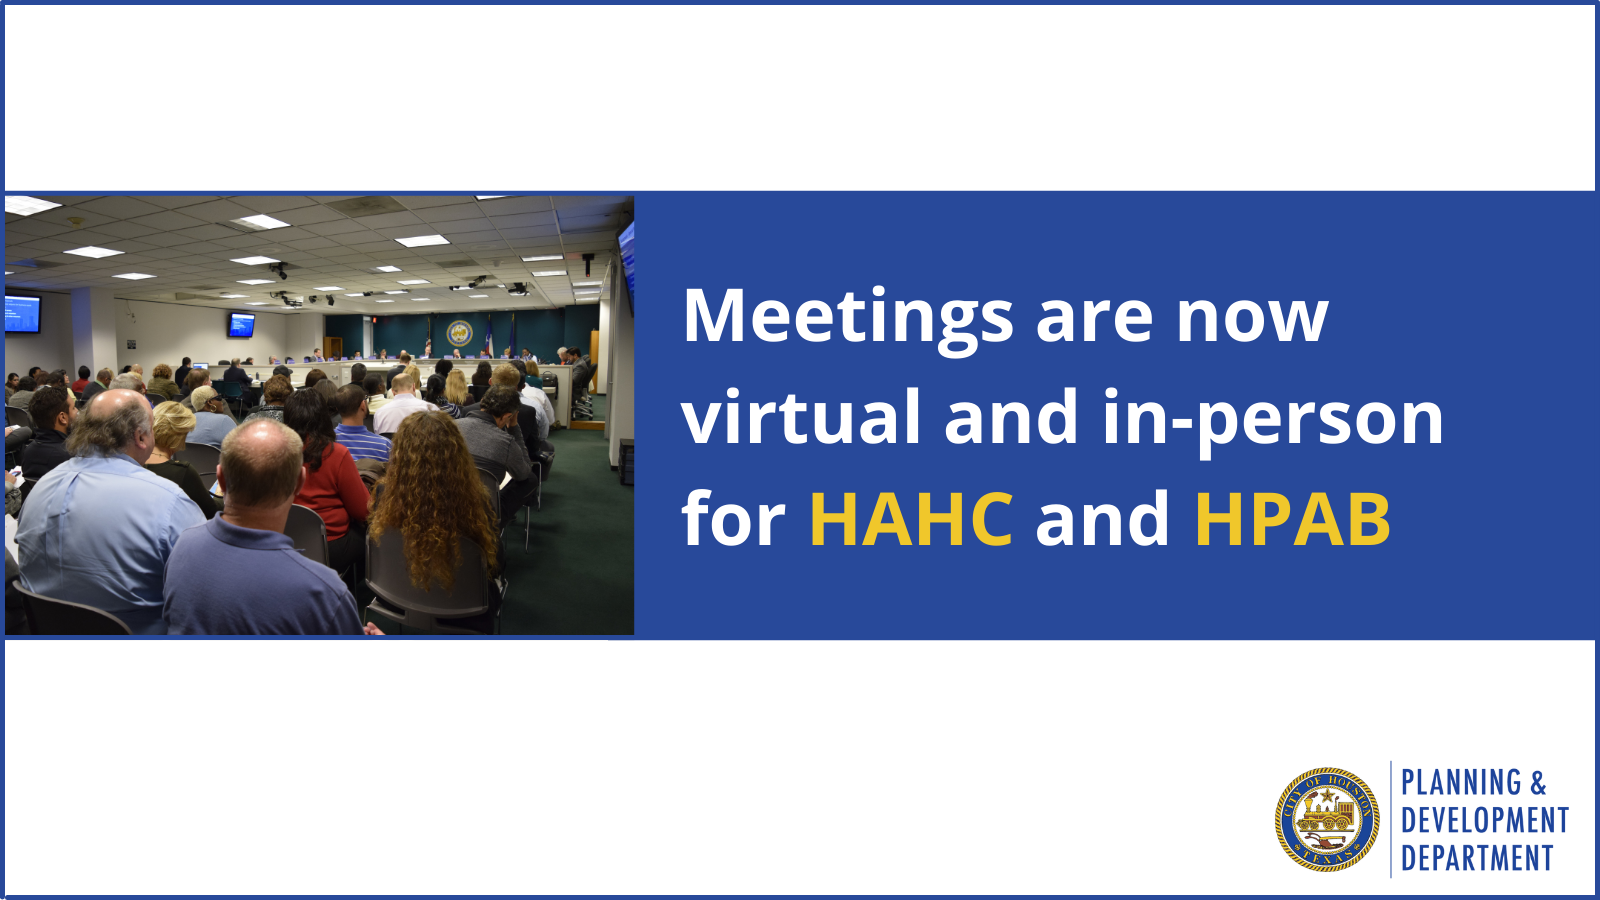 HAHC and HPAB Meetings Information